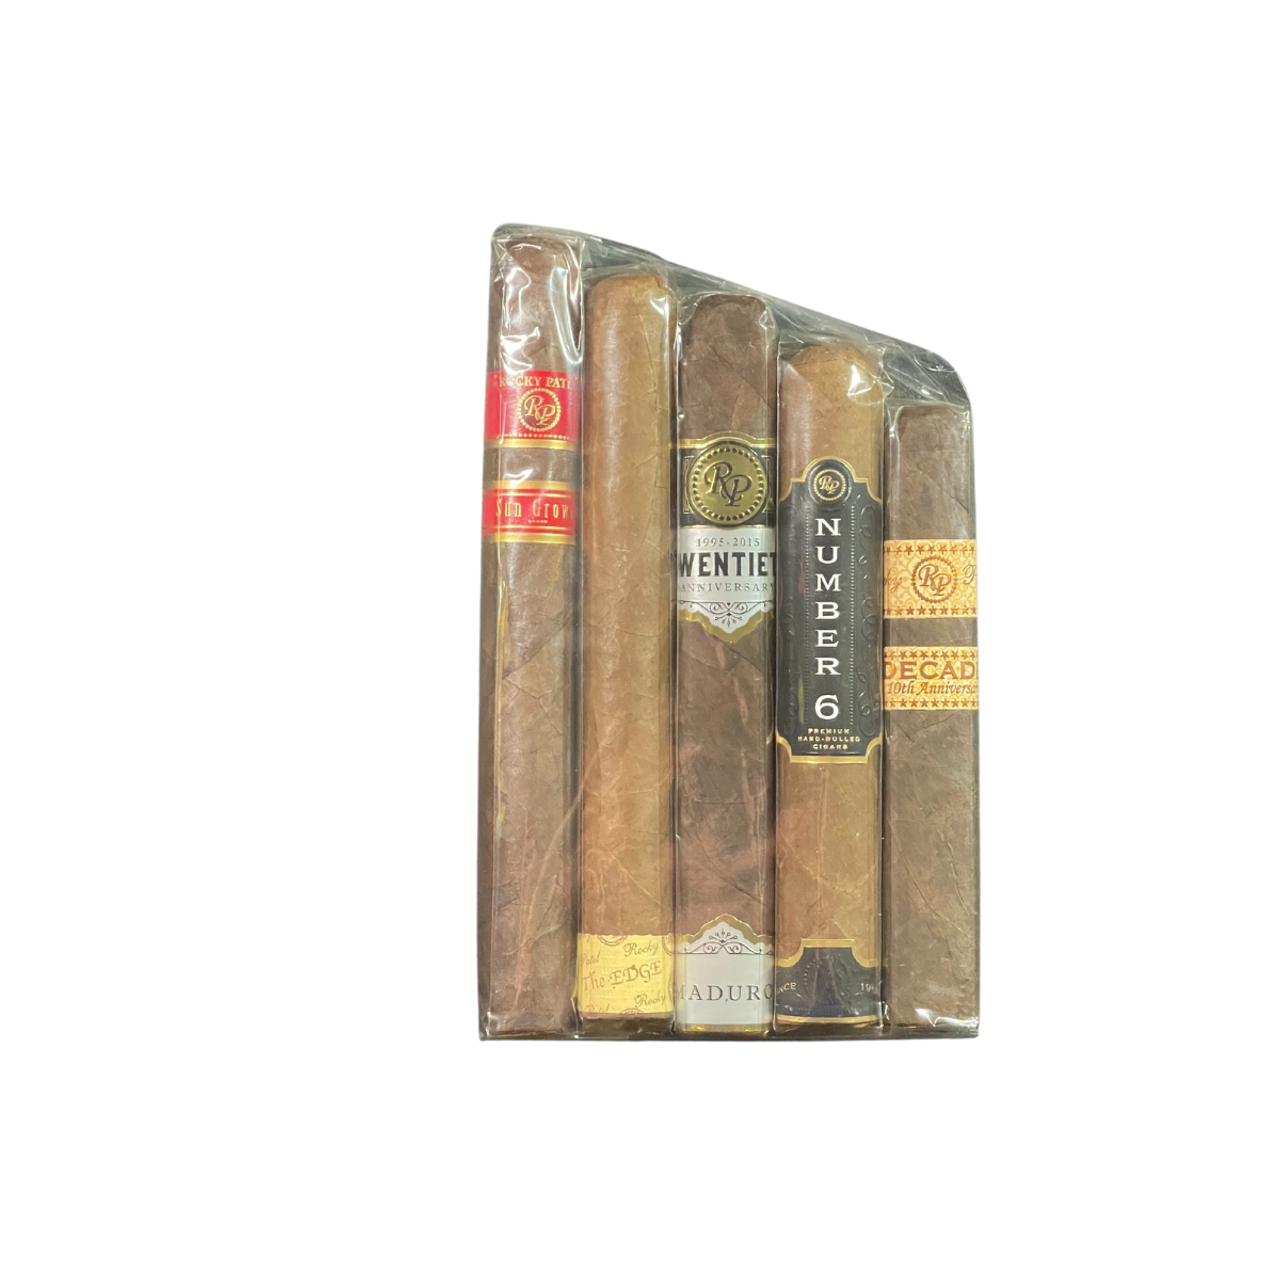 Rocky Patel 90+ Rated Factory Sampler of 5 from cigarsamplers.com comes with FREE shipping!